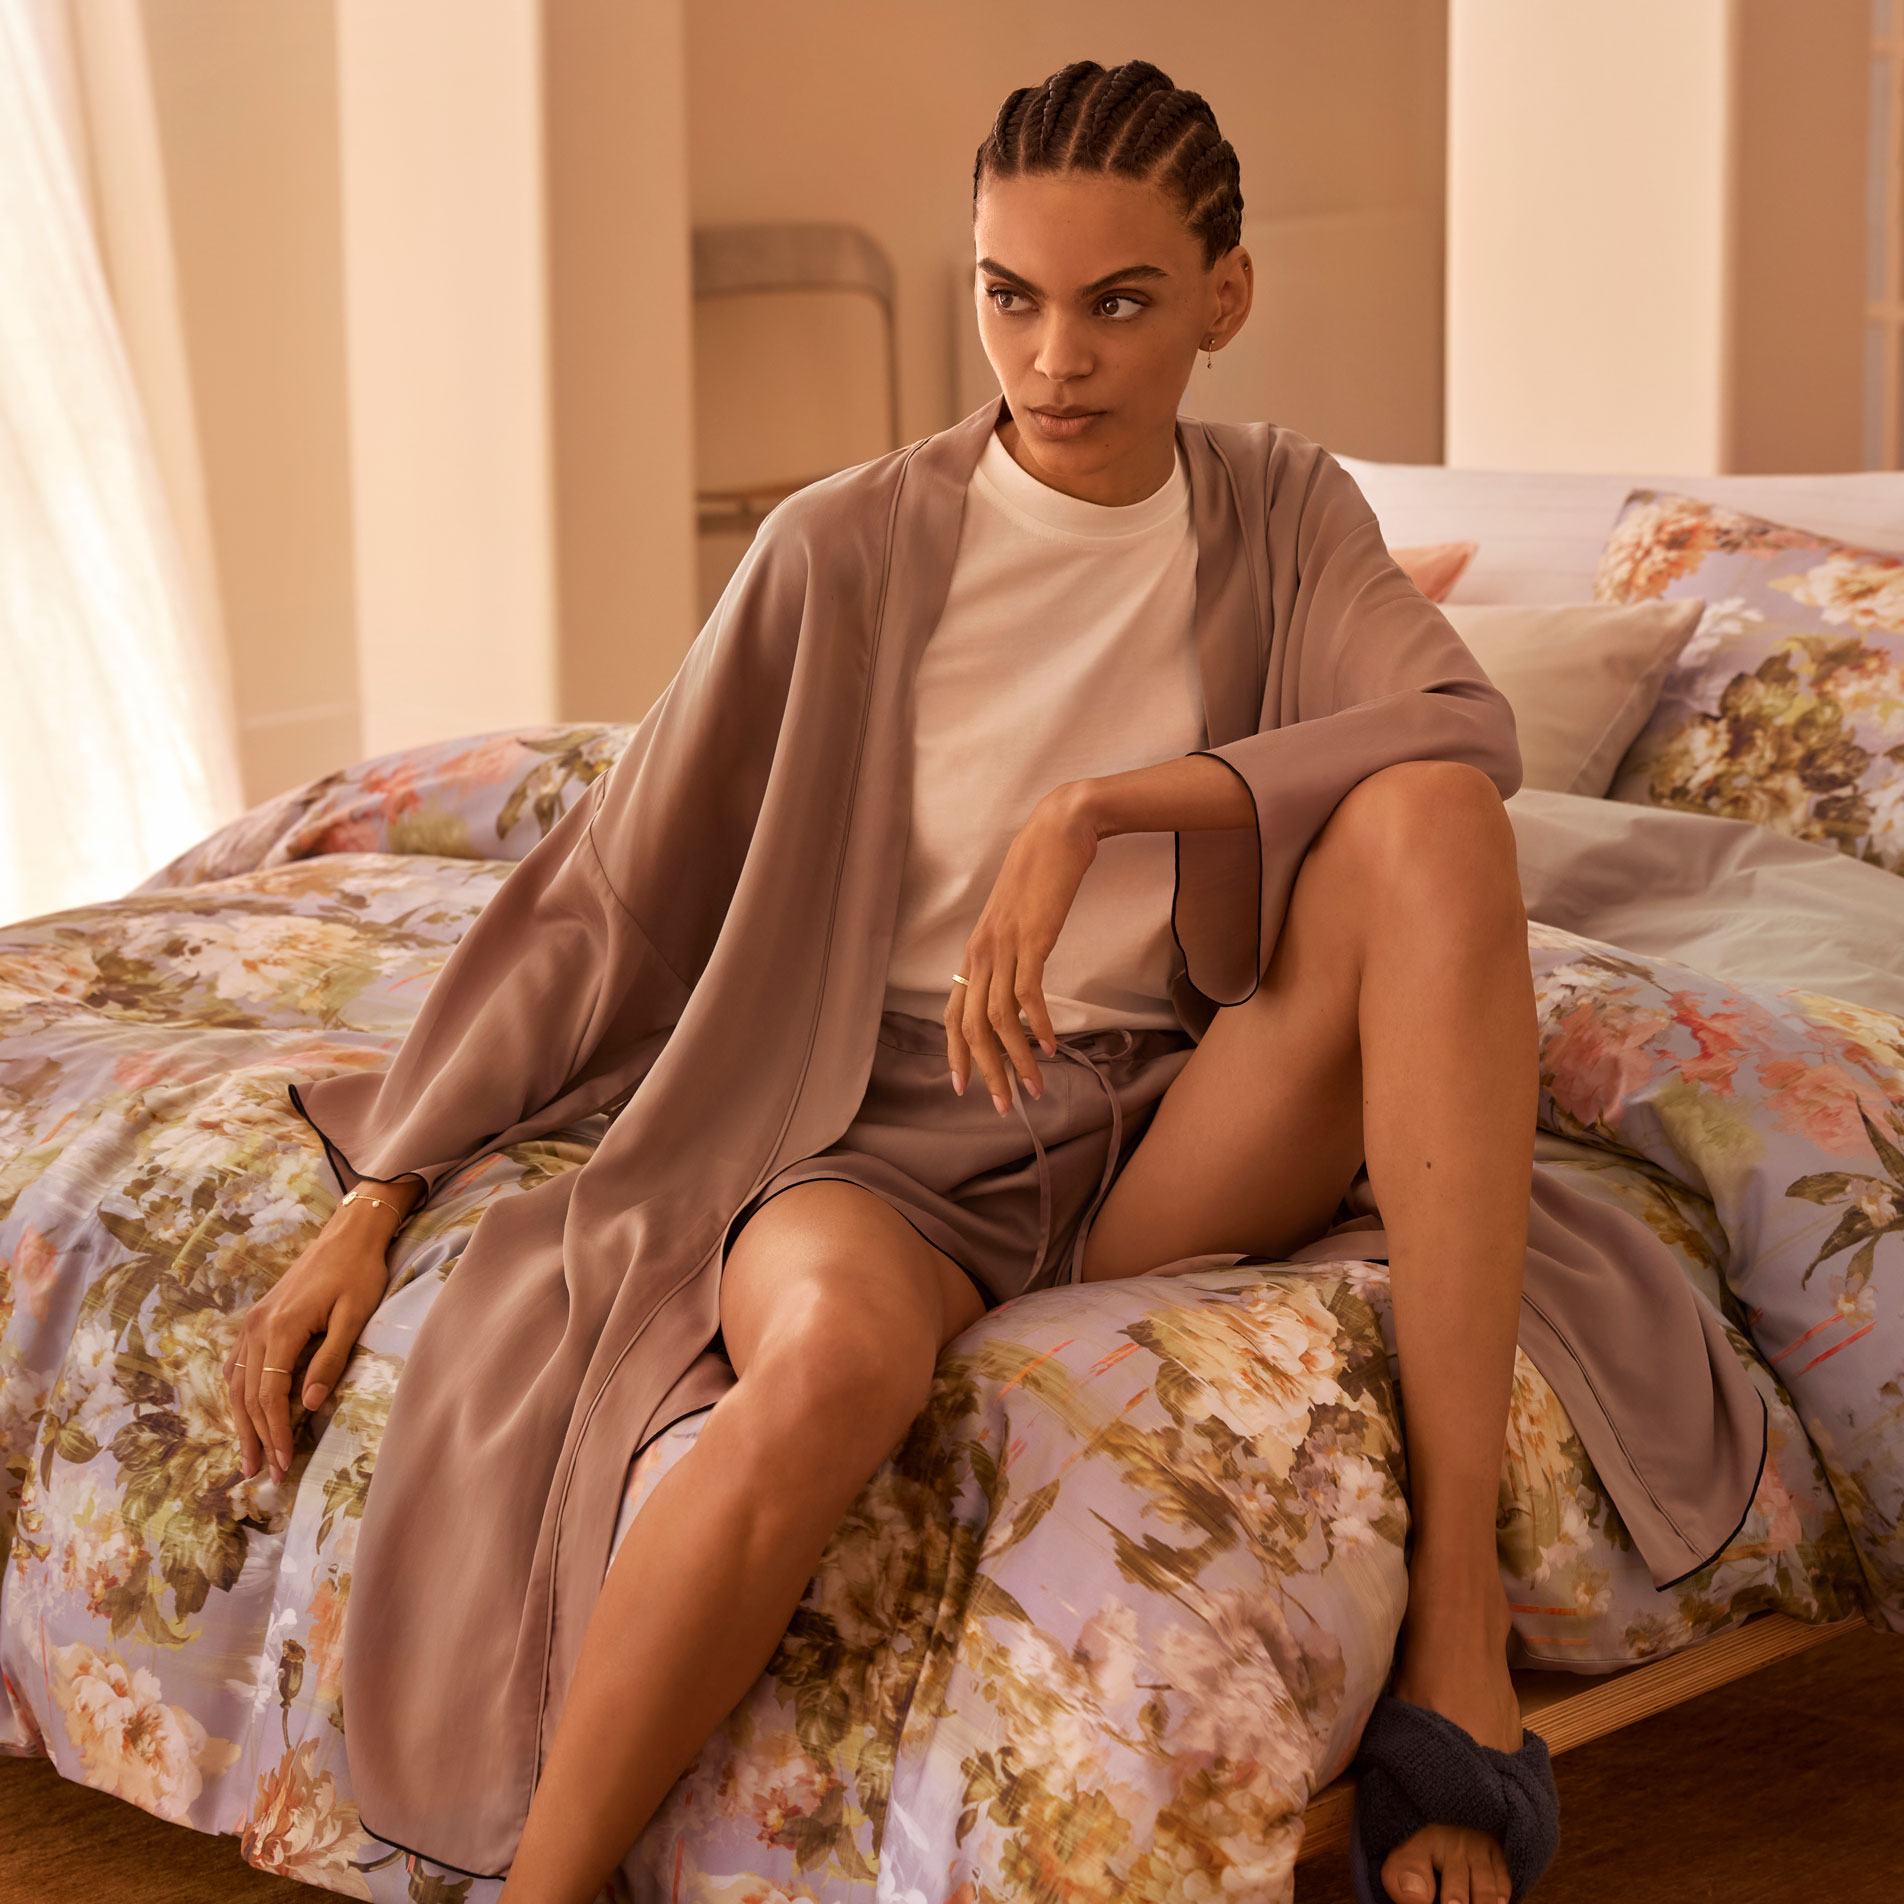 A young woman wearing silky loungewear and braids sits on the corner of a floral print bed, by a window in a neutral-toned room